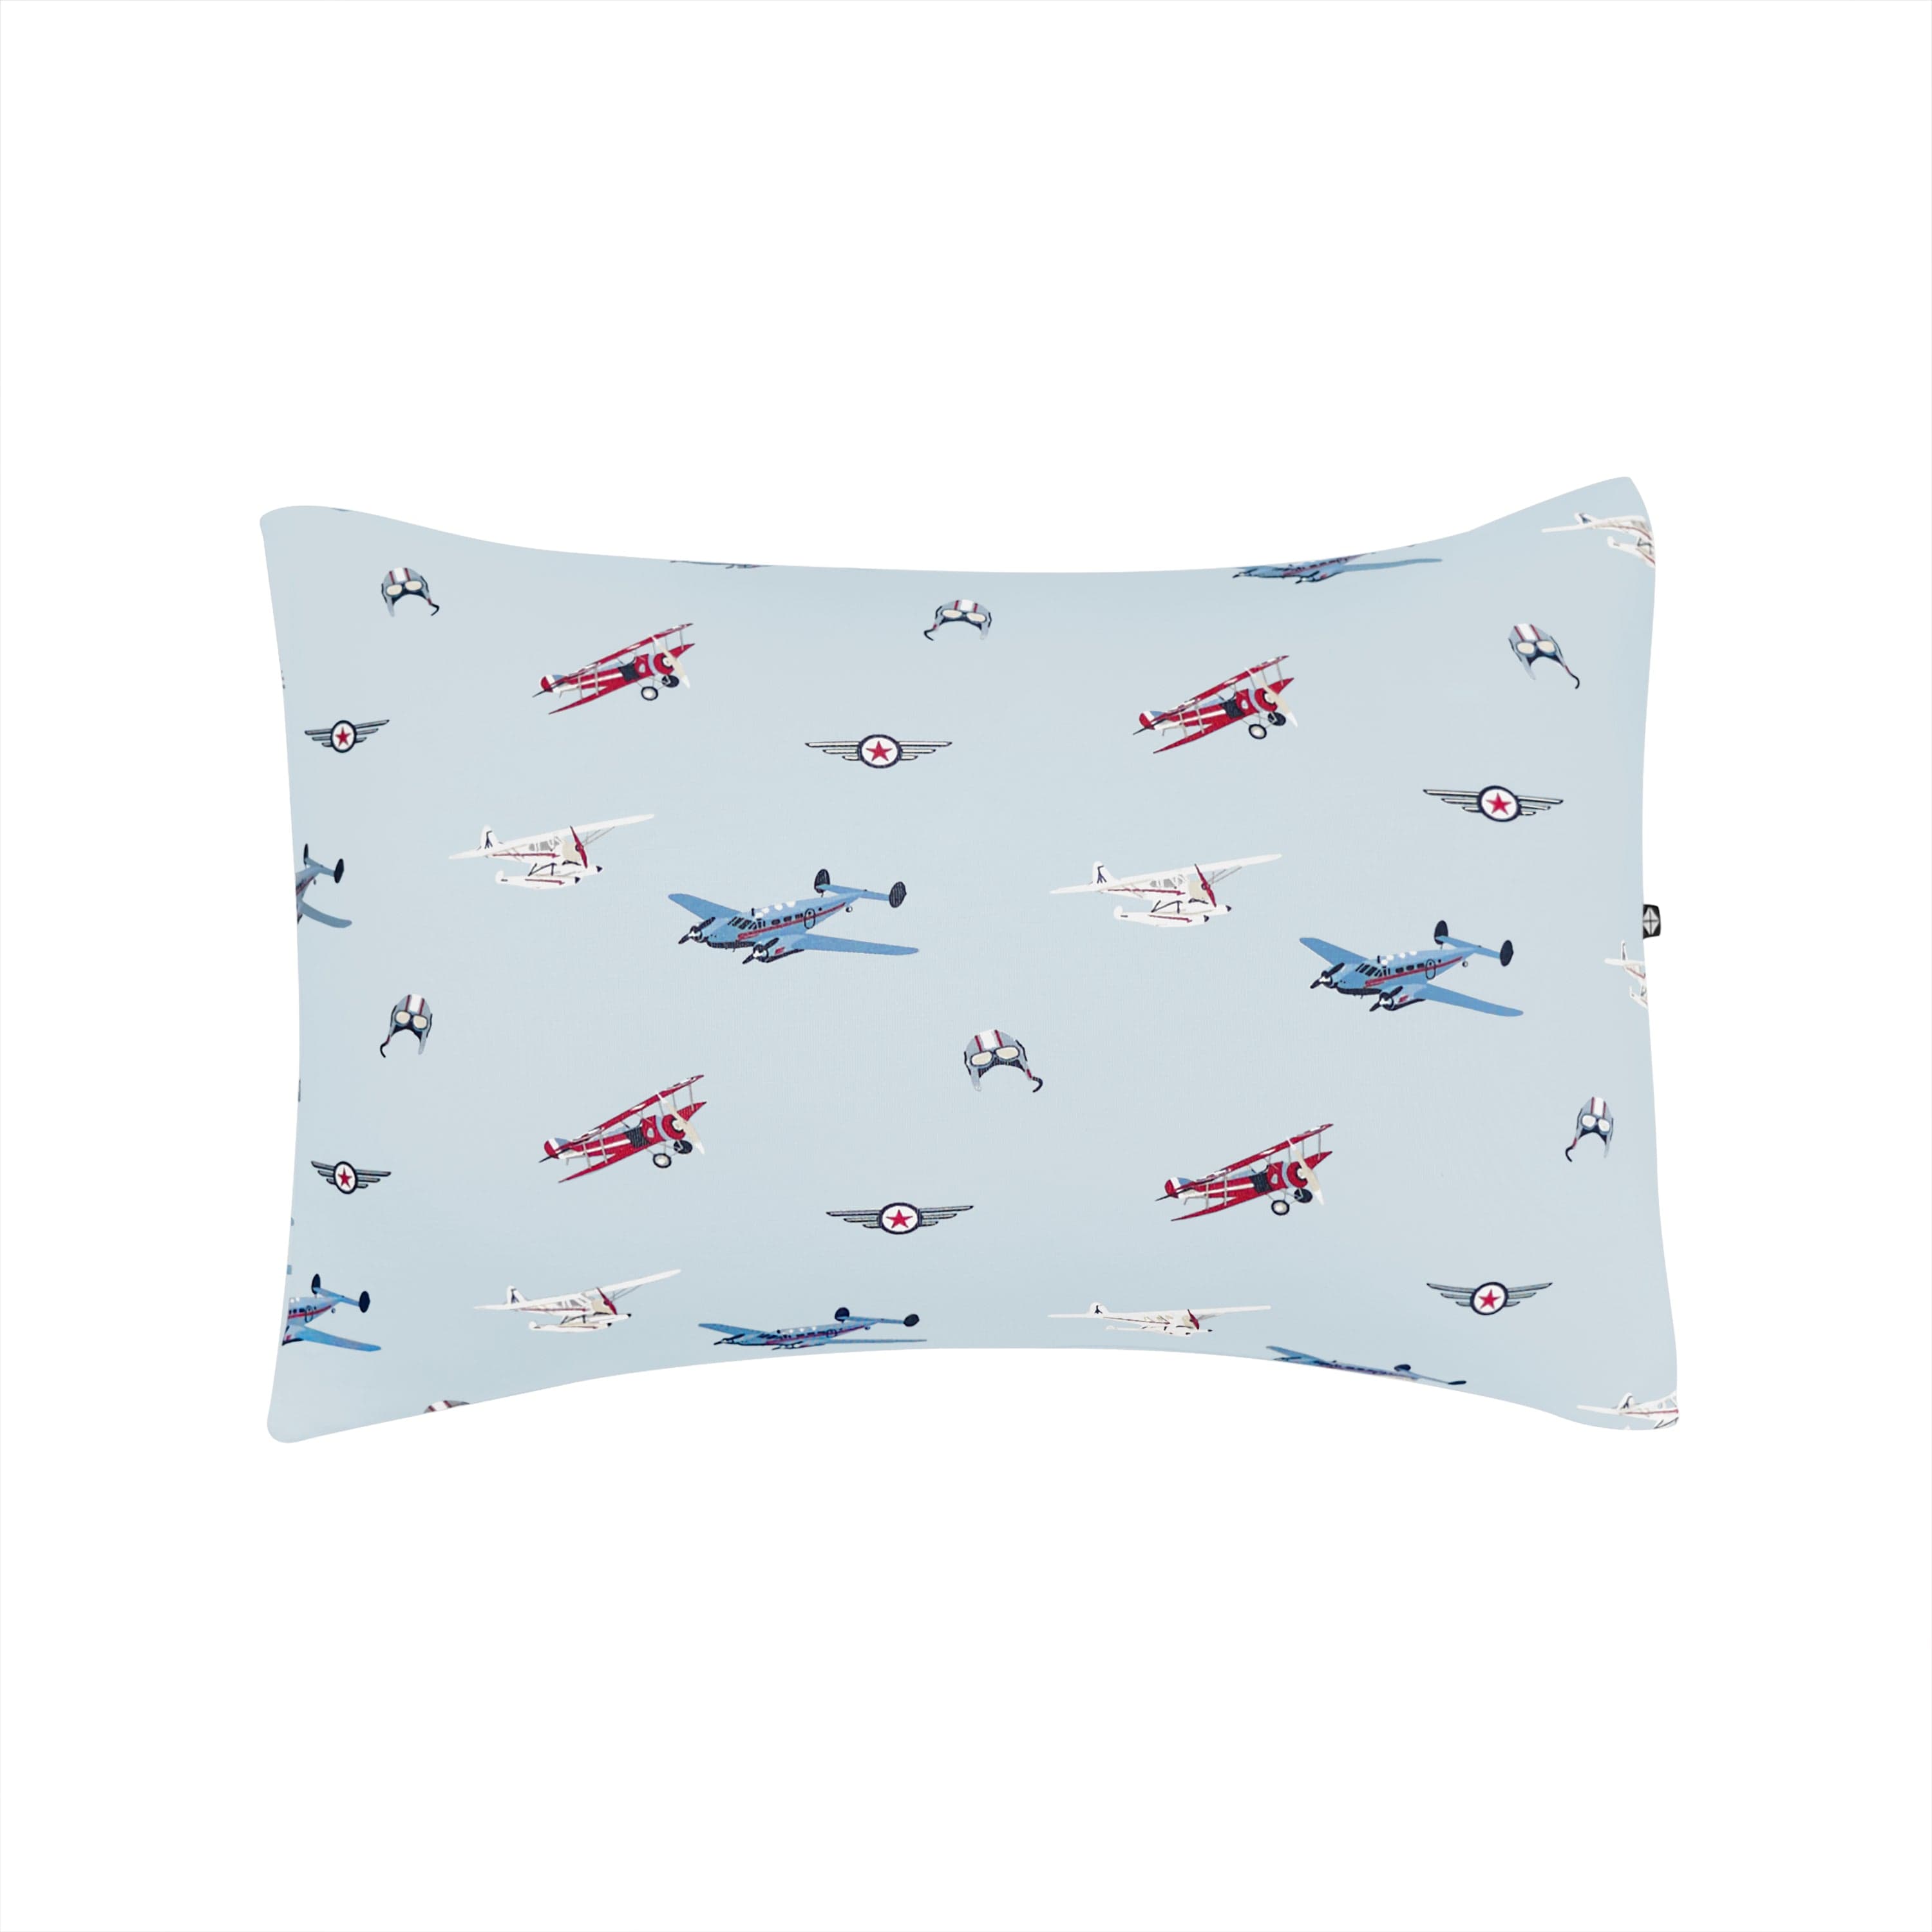 Kyte Baby Toddler Pillow Case Vintage Planes / Toddler Toddler Pillowcase in Vintage Planes